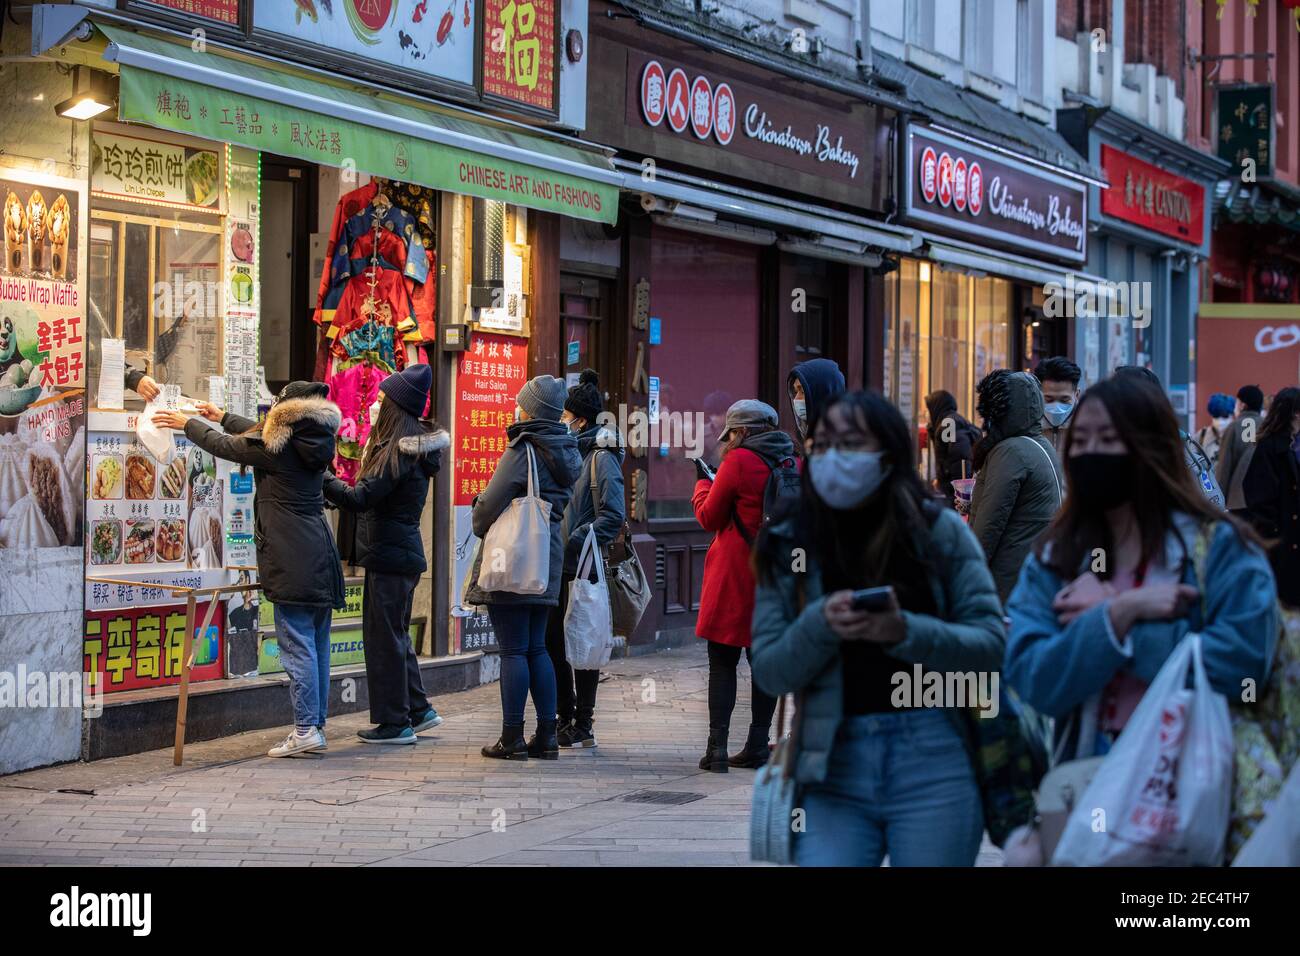 London's China Town on the first evening of the New Lunar Year, The Year of the Ox, during the Coronavirus Lockdown prohibiting the annual celebration Stock Photo